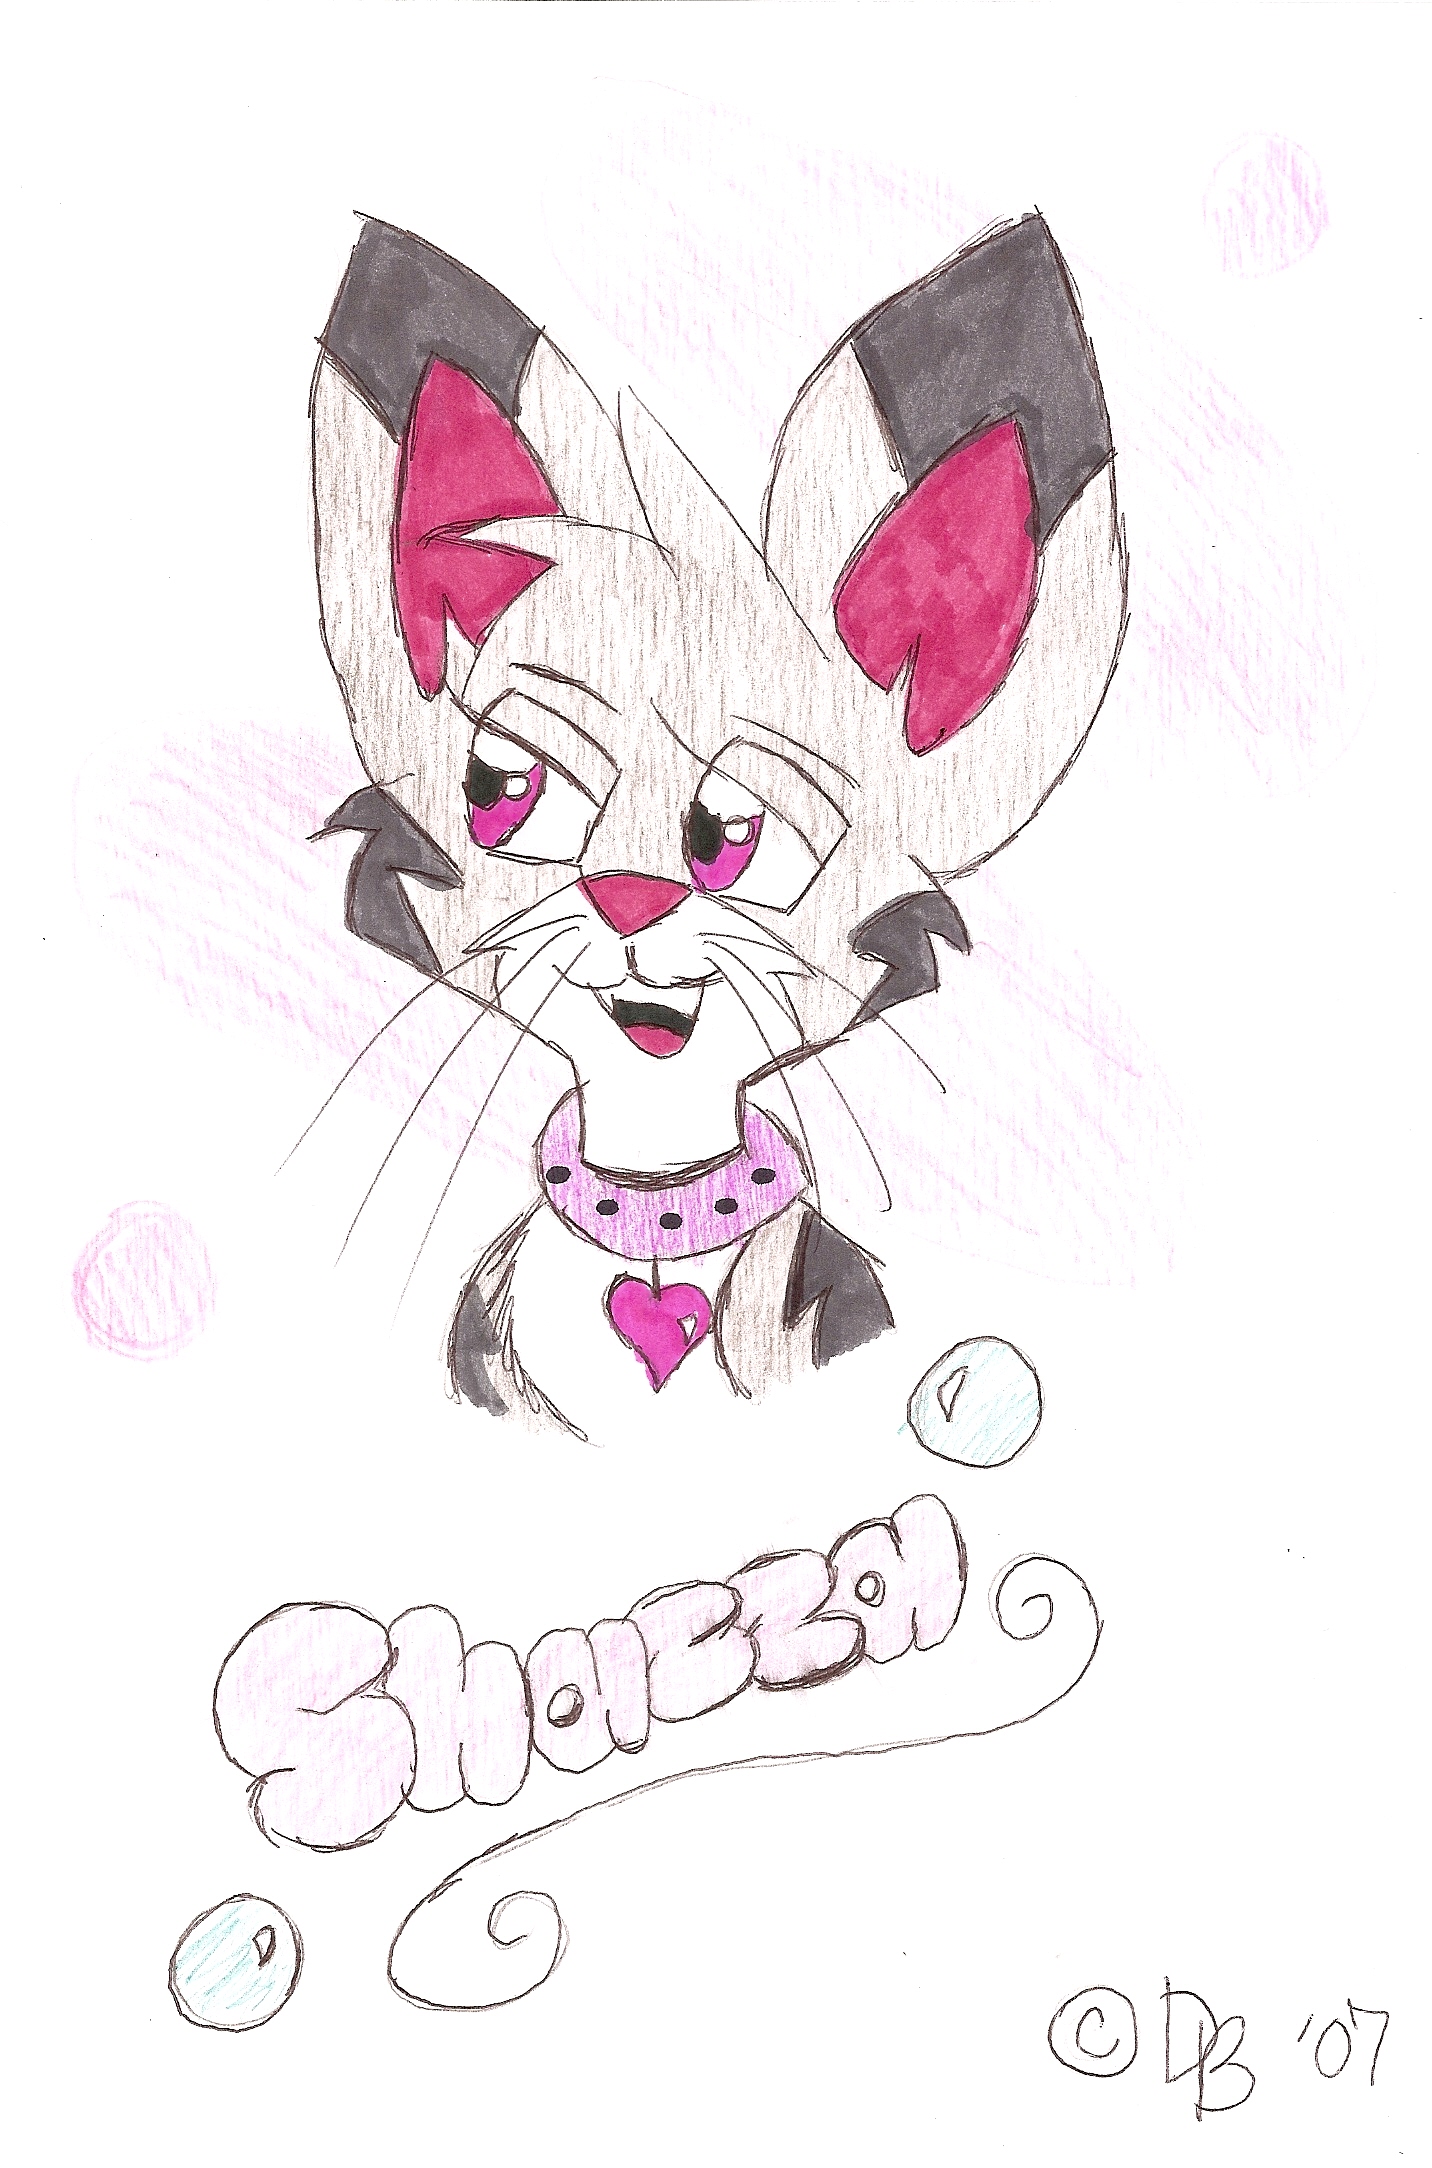 Shazza the kittypet! by desertbreeze